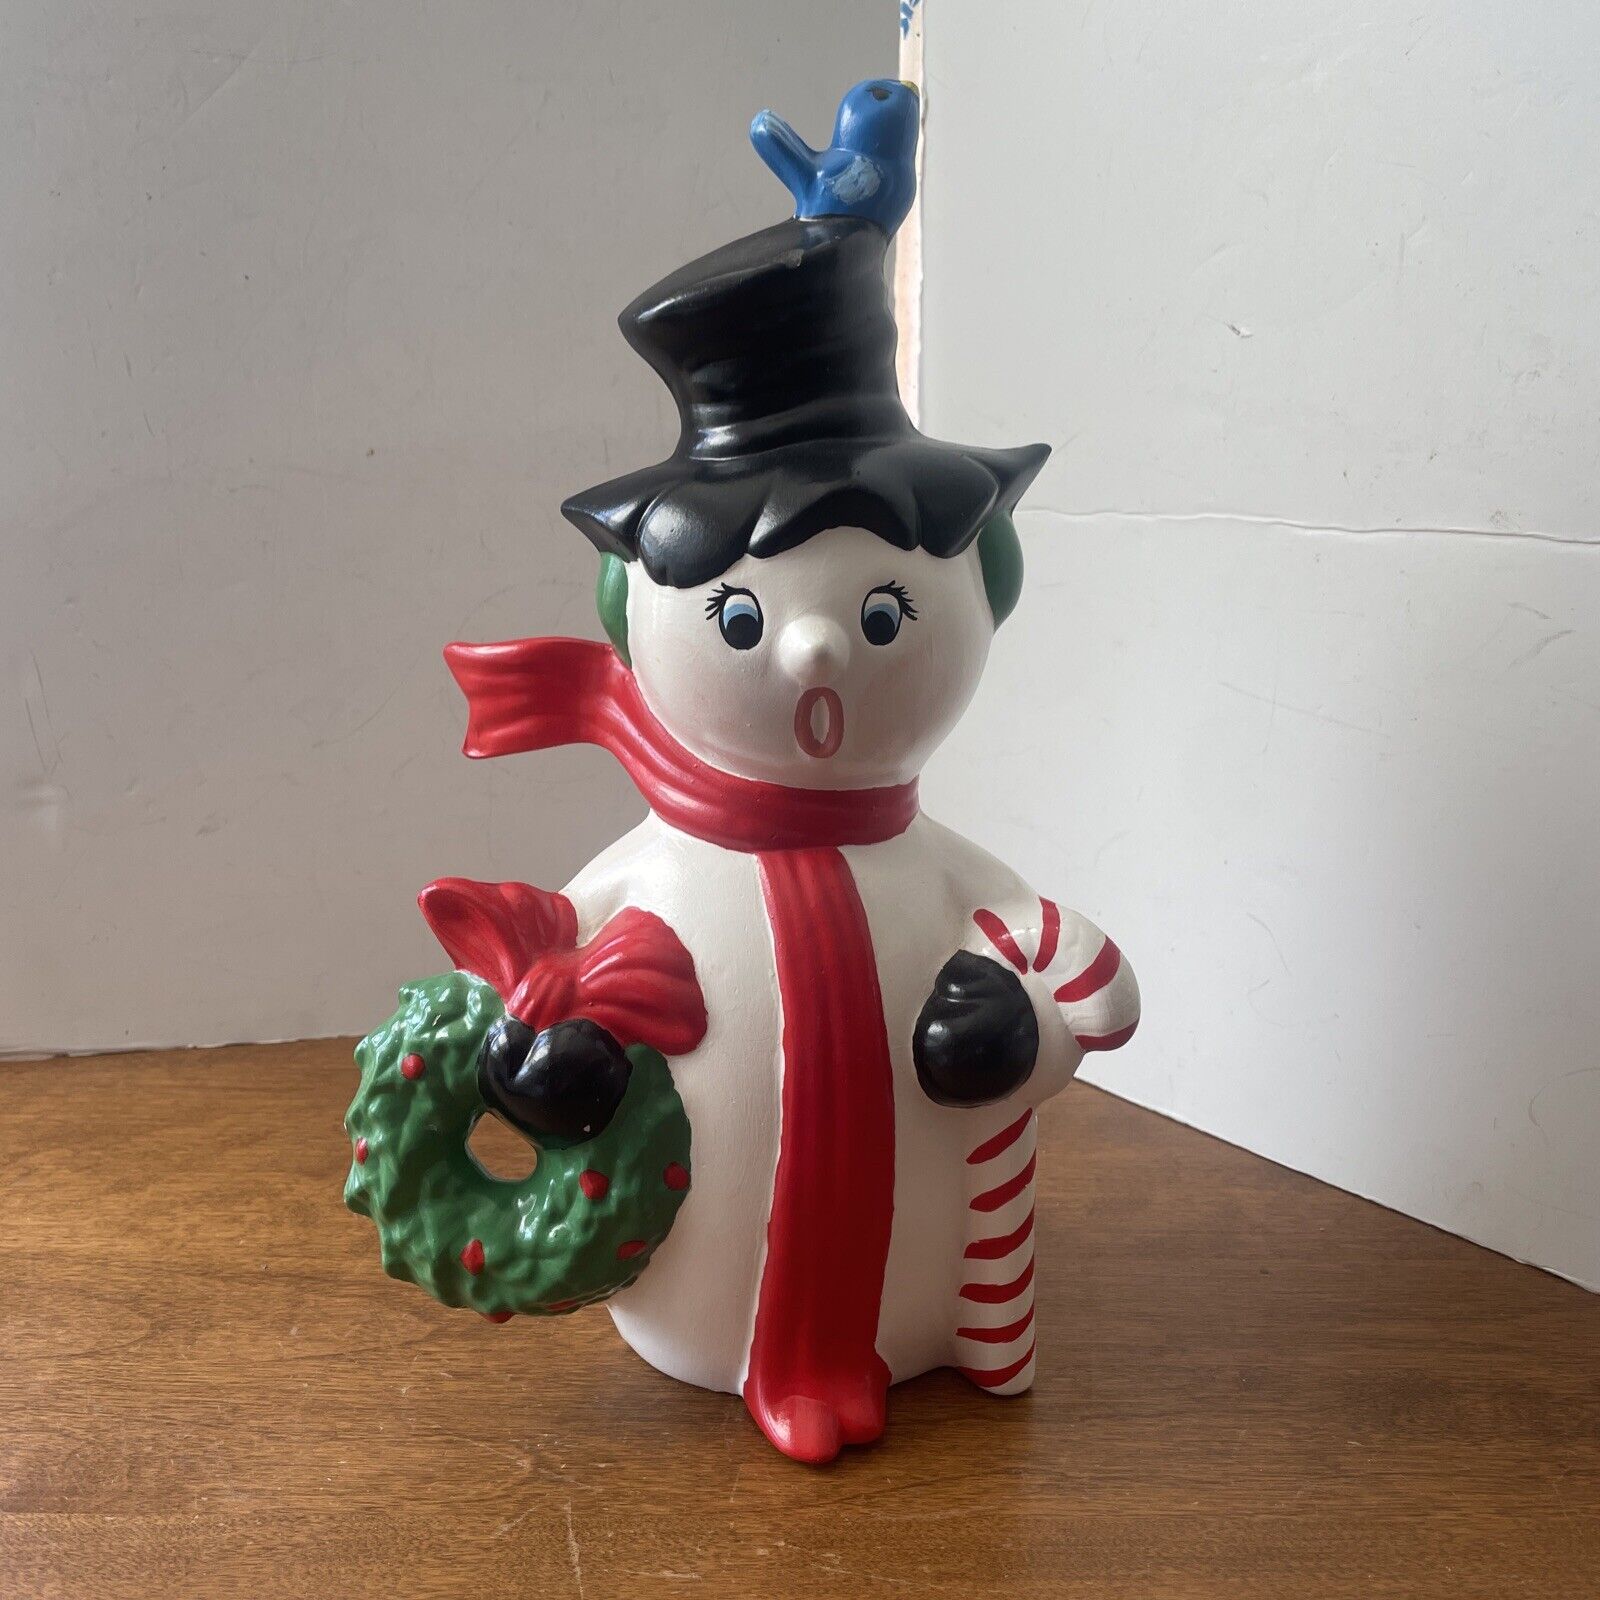 Vintage Ceramic Snowman Frosty Mold 13” Top Hat Candy Cane Scarf Hand Painted